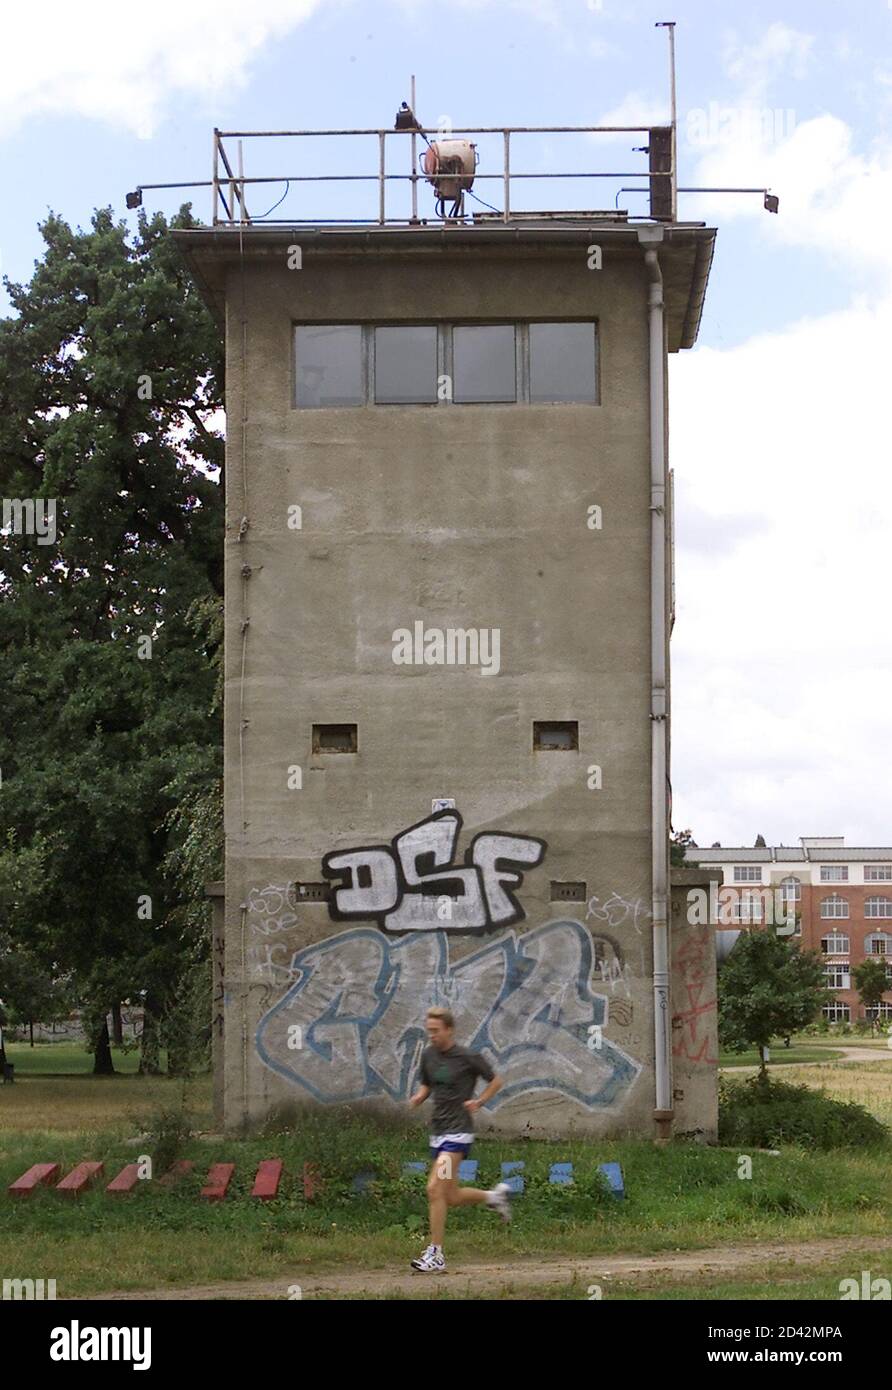 A man joggs in front of a watch tower at the Berlin Wall, the former East German frontier in Berlin-Treptow August 1, 2001. All that is left of the barrier built 40 years ago on August 13, 1961 by the Communist East German government is a grassy gap - a 30-metre (yard) wide 'death strip' surrounding the former capitalist enclave of West Berlin once used for East German border guard patrols - and a few chipped remnants.The converted death strip is nowadays an urban utopia, a traffic-free green zone of nature preserve in and around Germany's biggest city. Picture taken August 1, 2001.  AX Stock Photo